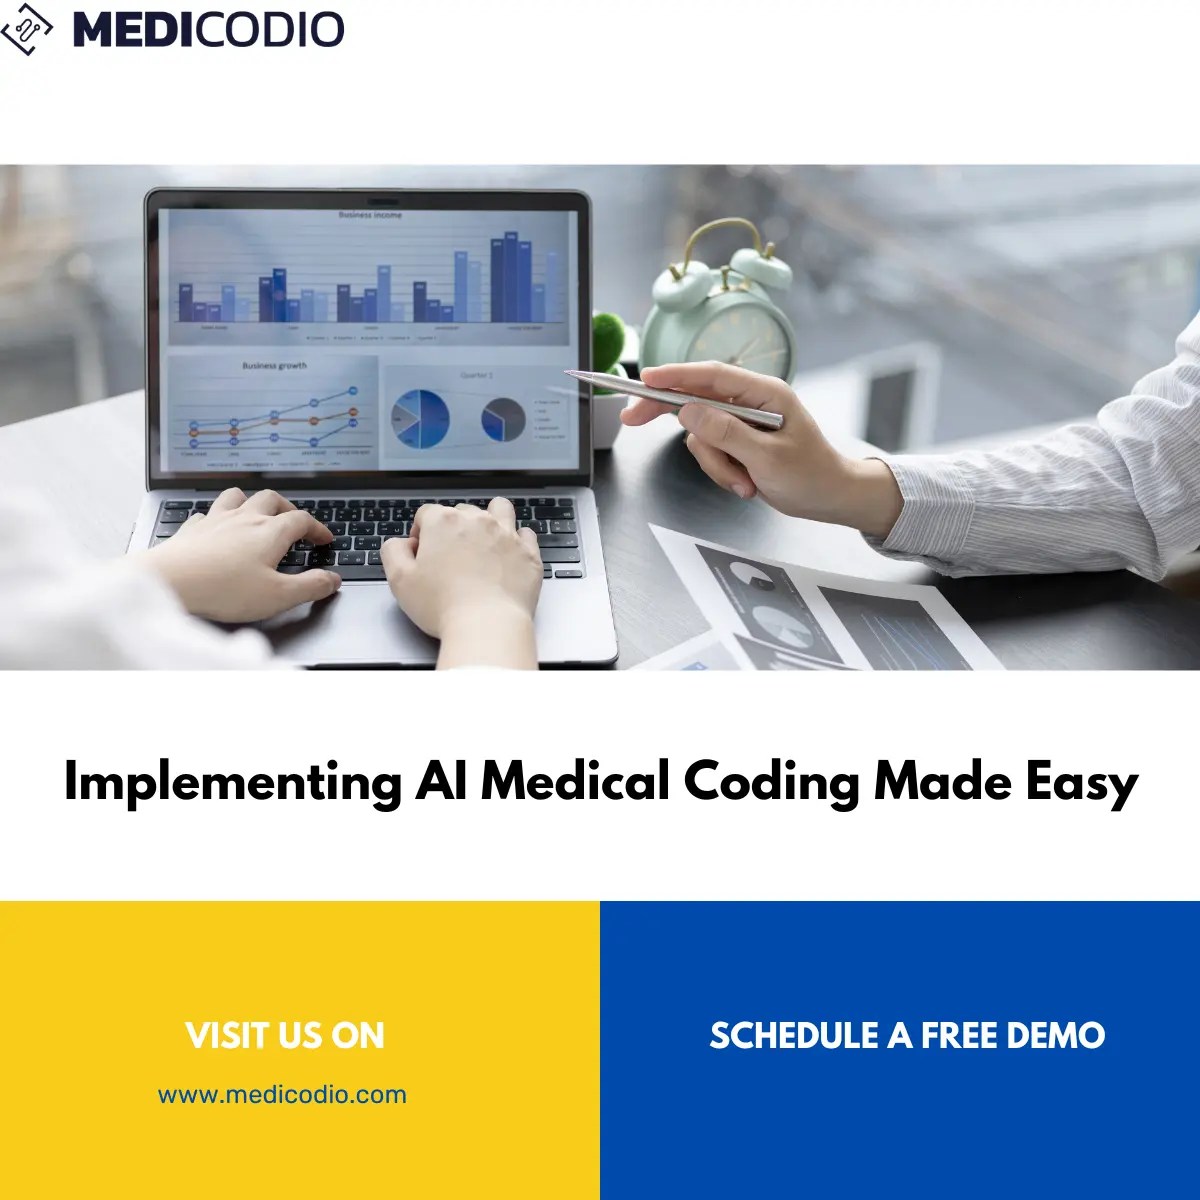 How To Start A Medical Coding Business